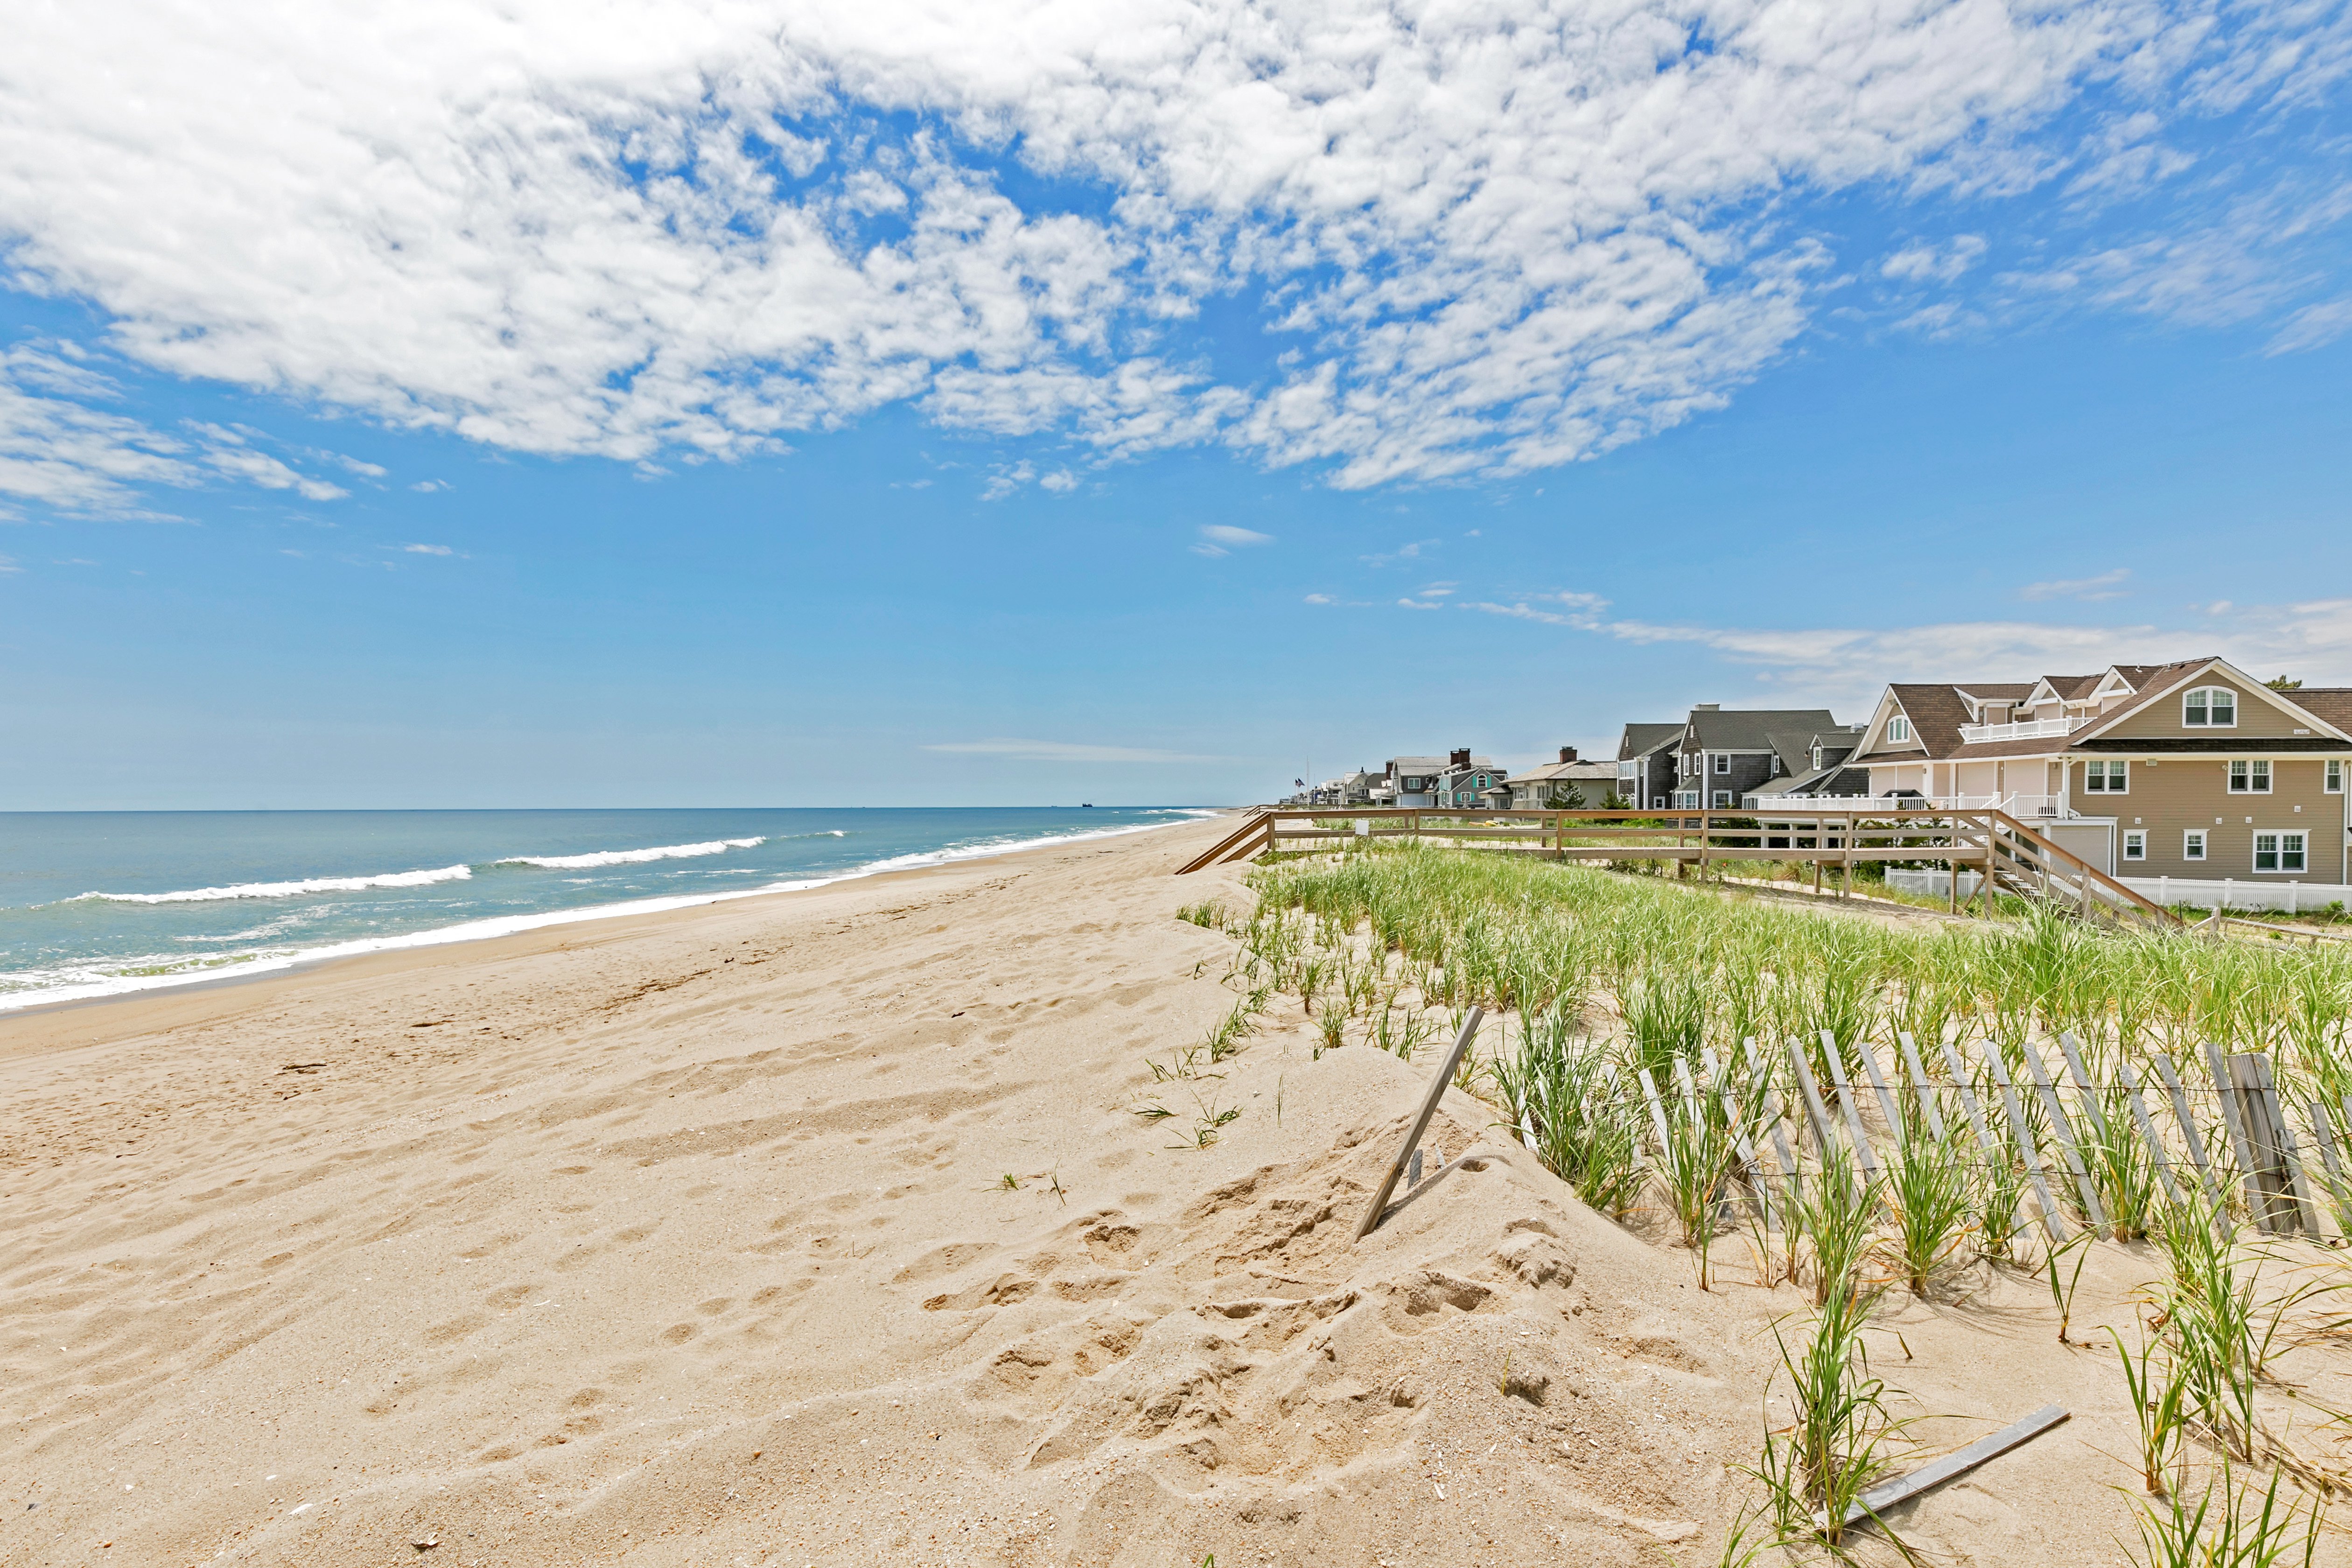 View of the sunny beach in Mantoloking, New Jersey